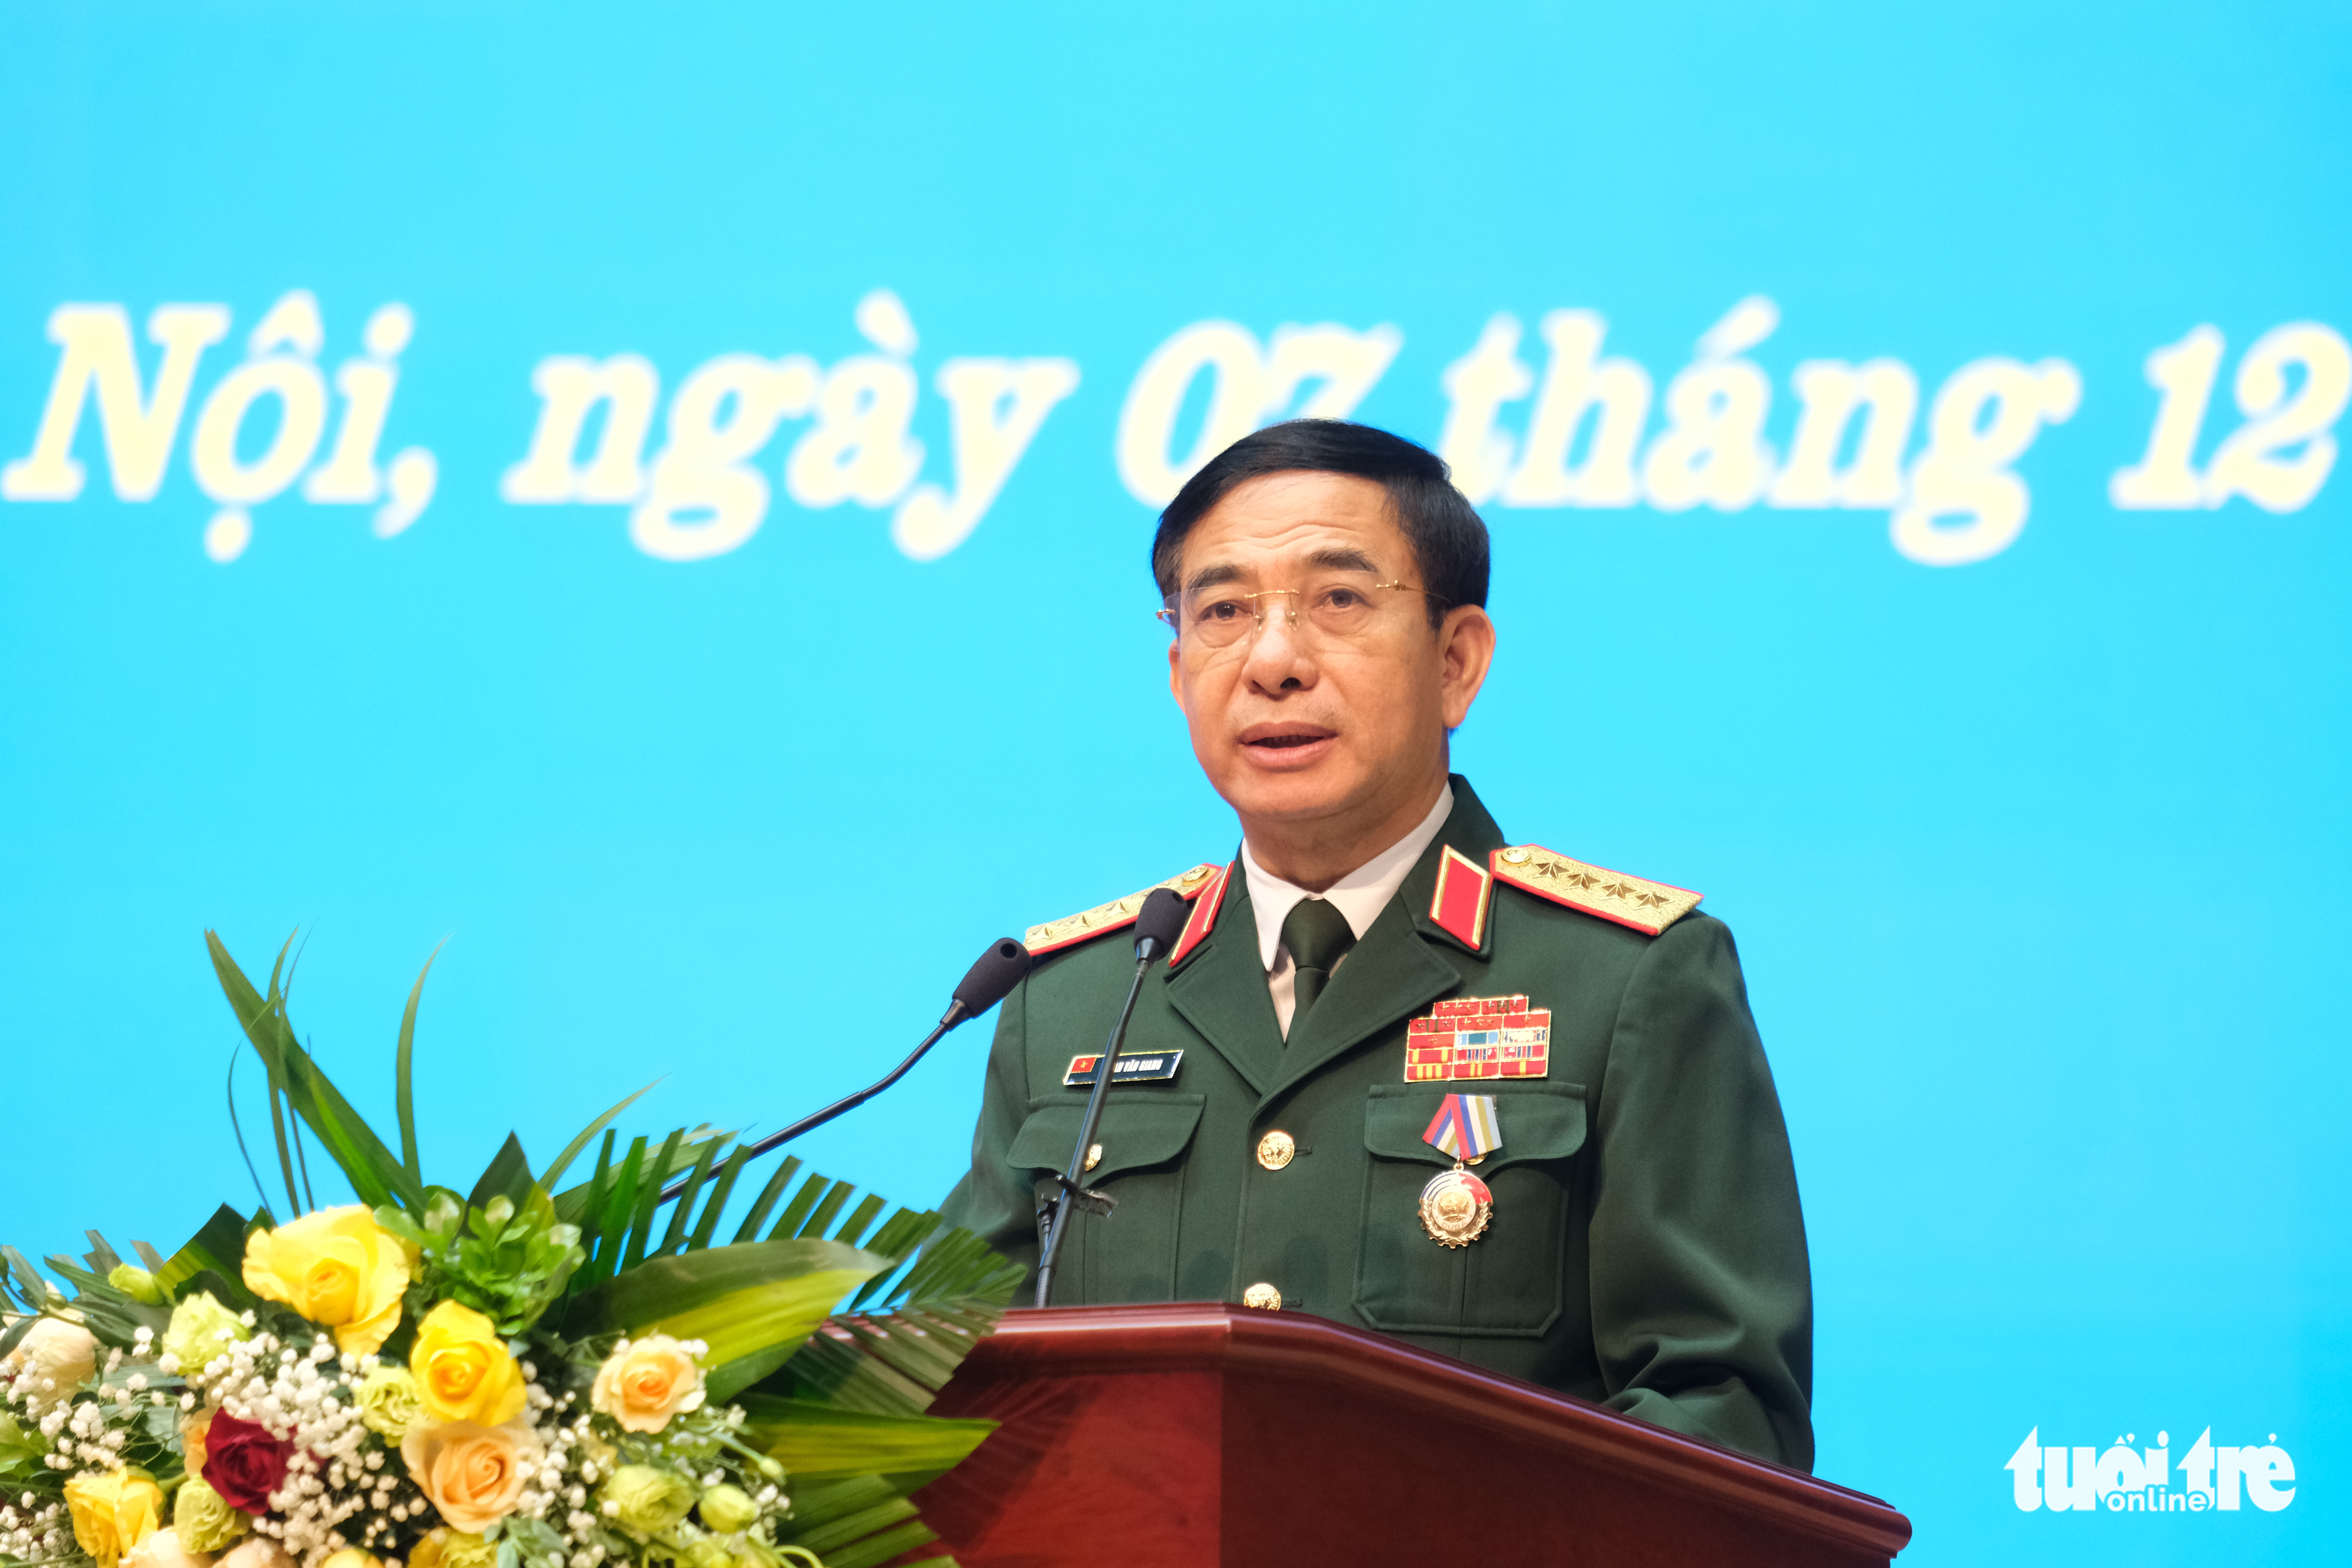 General Phan Van Giang – Politburo member, deputy secretary of the Central Military Commission, and Minister of National Defense – speaks at the ceremony in Hanoi, December 7, 2022. Photo: Ha Thanh / Tuoi Tre